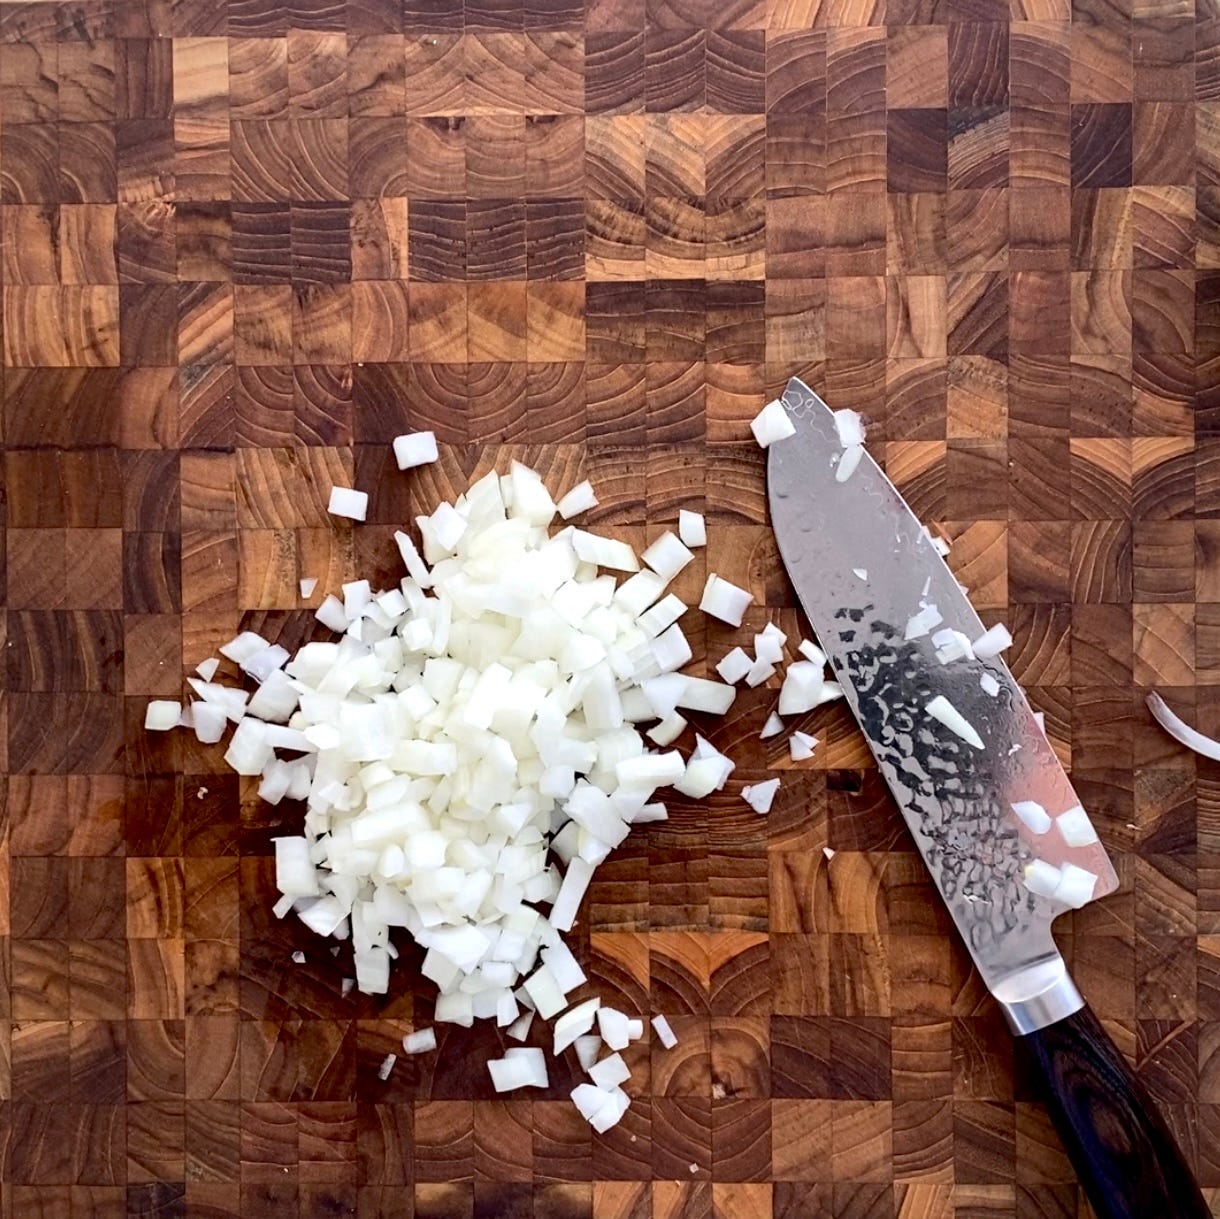 What You Should Do With Your Cutting Board Before Using A Knife